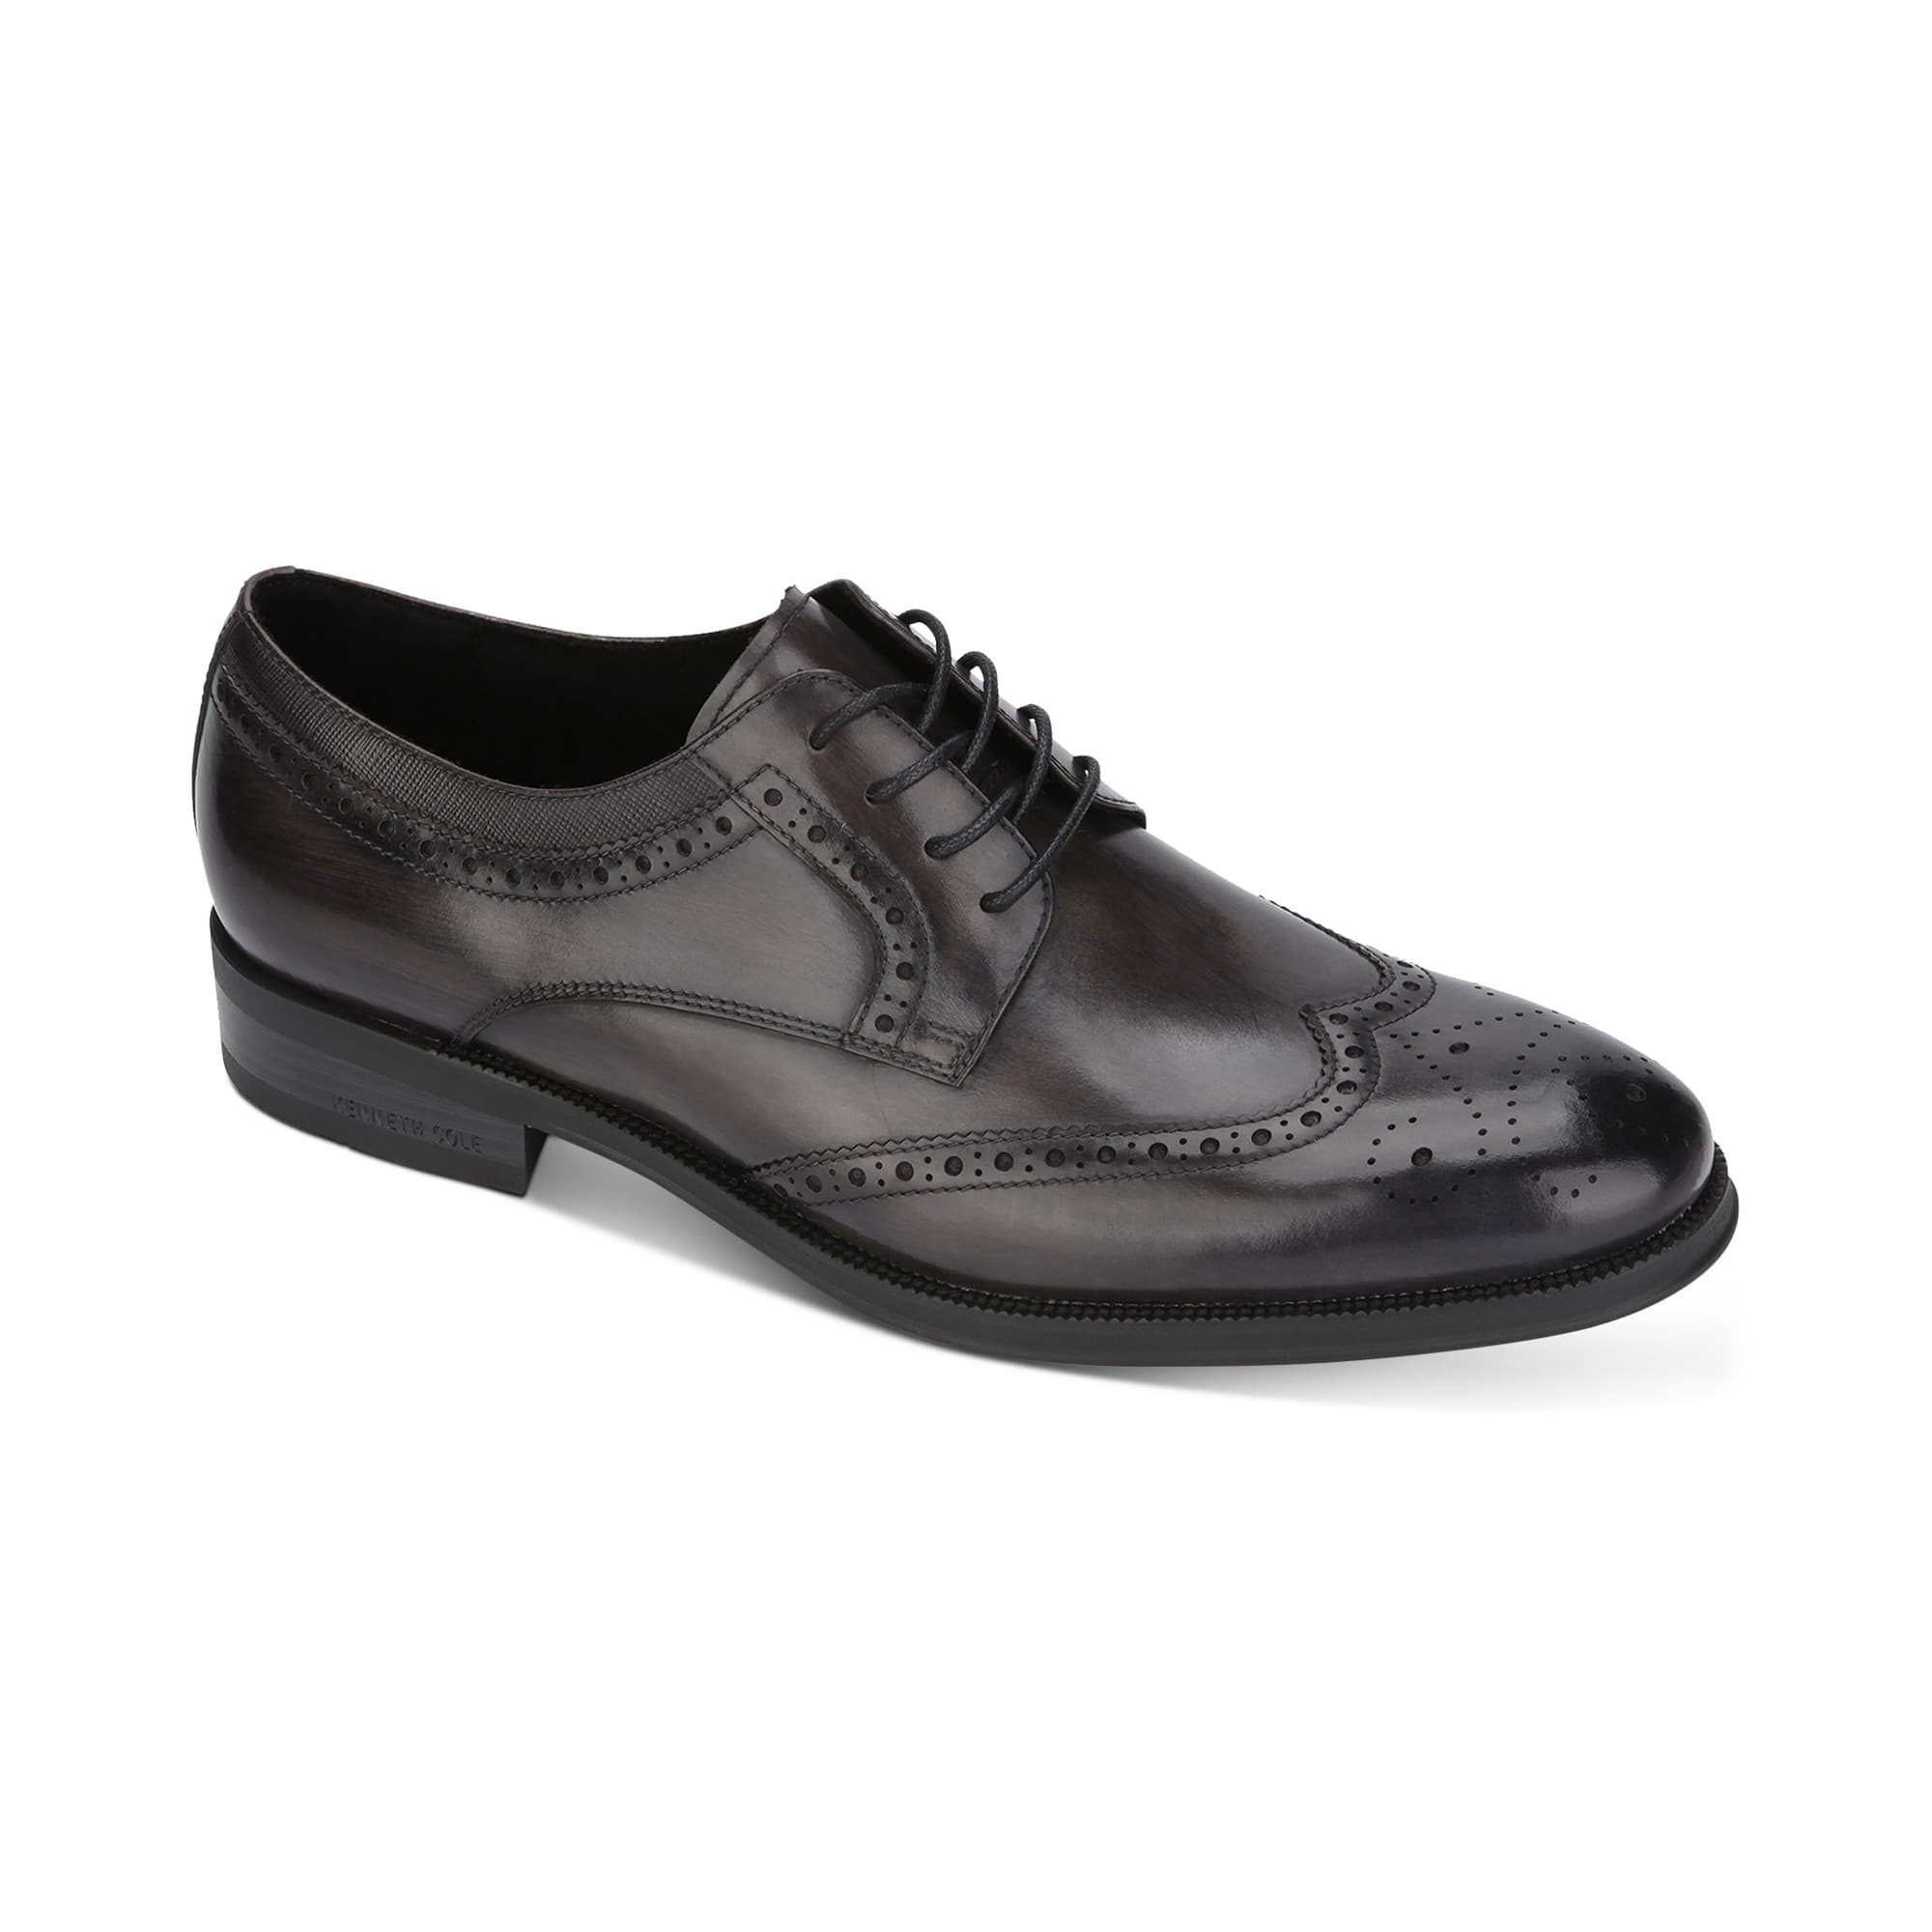 woocommerce-673321-2209615.cloudwaysapps.com-kenneth-cole-new-york-mens-grey-leather-brock-wingtip-oxfords-shoes